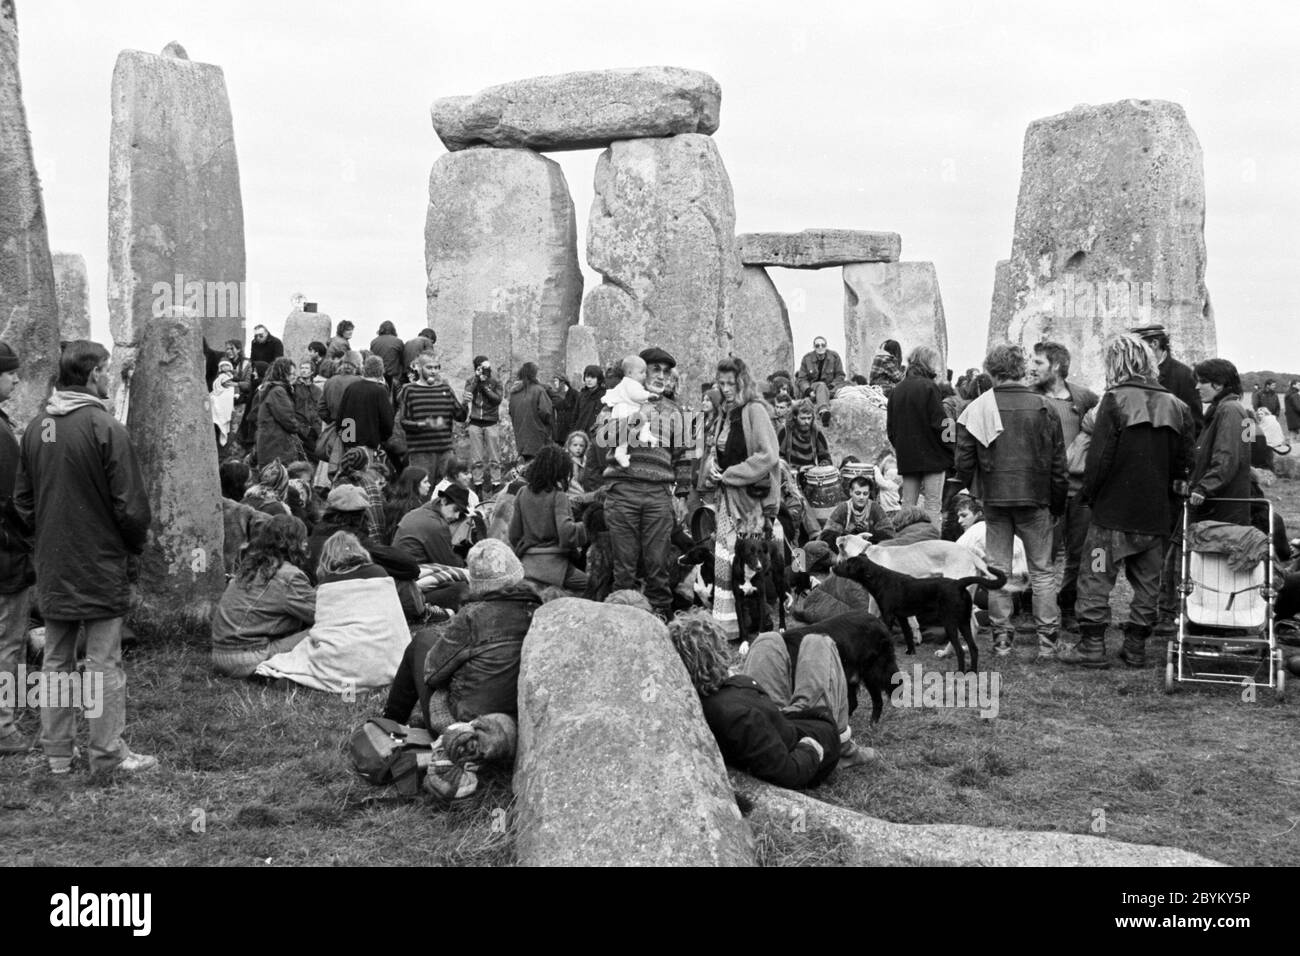 New Age Travellers gather peacefully in the inner circle at Stonehenge following sun rise circa 1990. Wiltshire. UK. Stock Photo